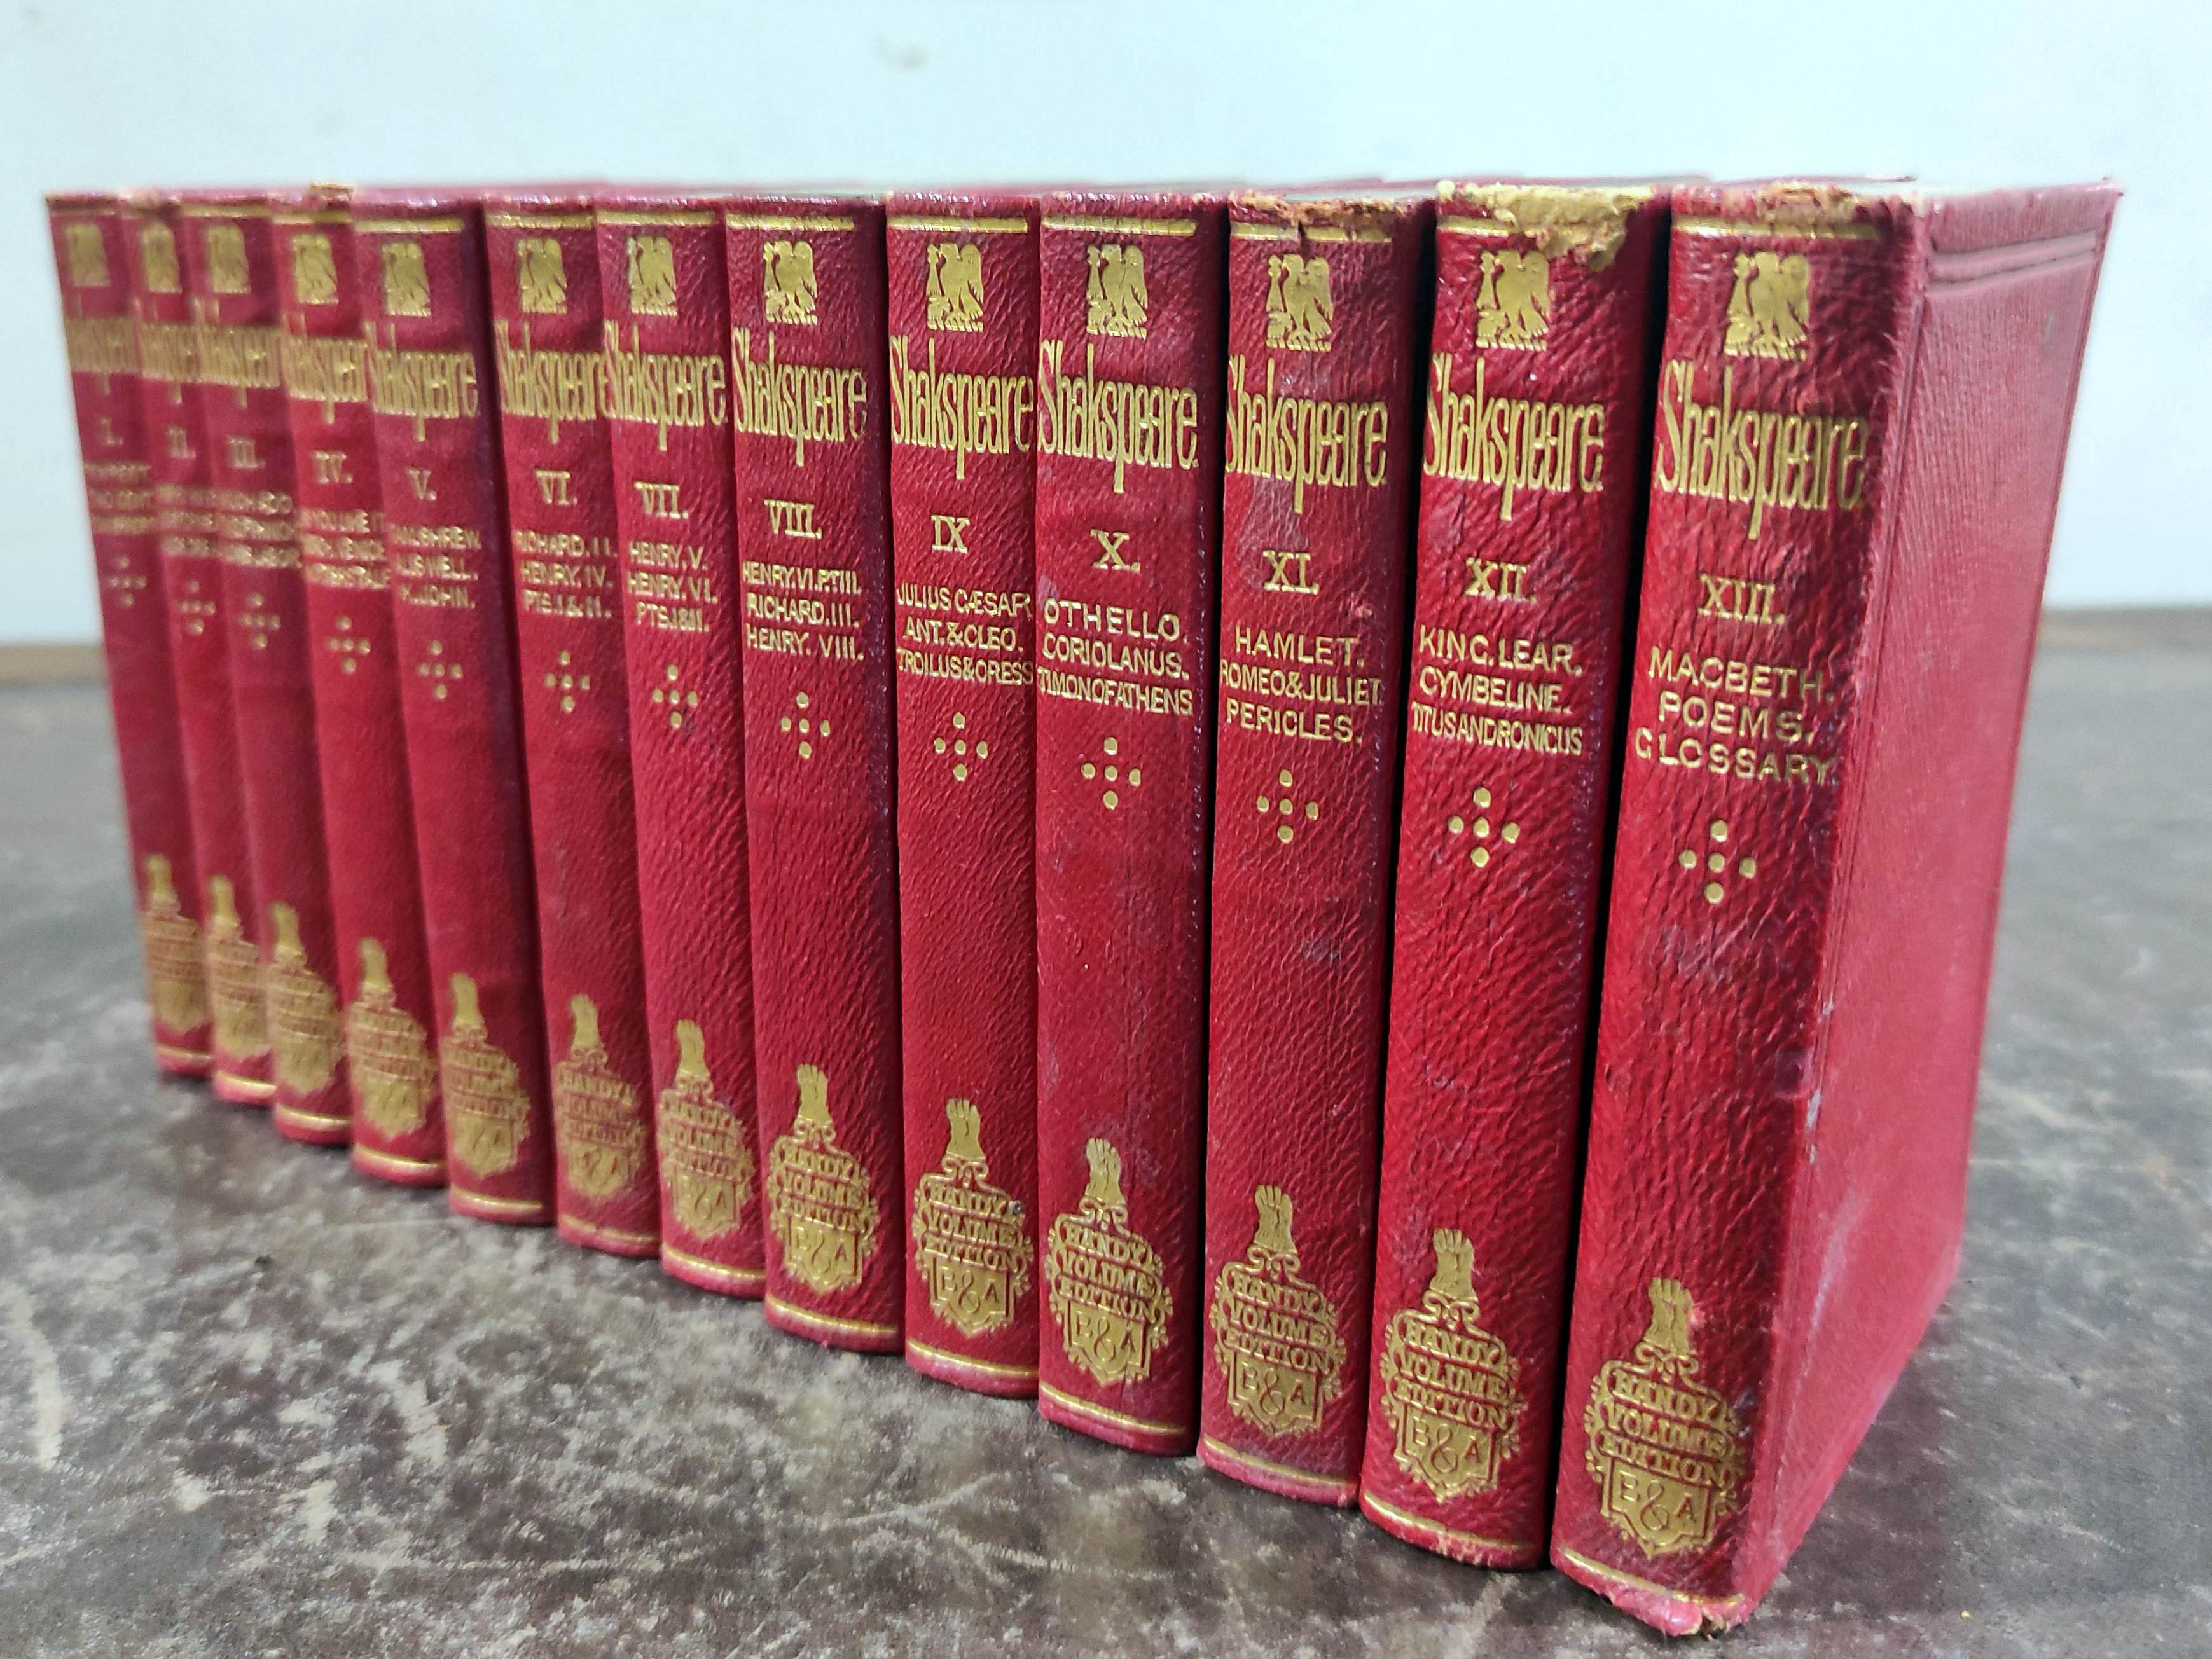 SHAKESPEARE WILLIAM.  The Handy-Volume Shakespeare. 13 vols. Small format. Limp red morocco, gilt